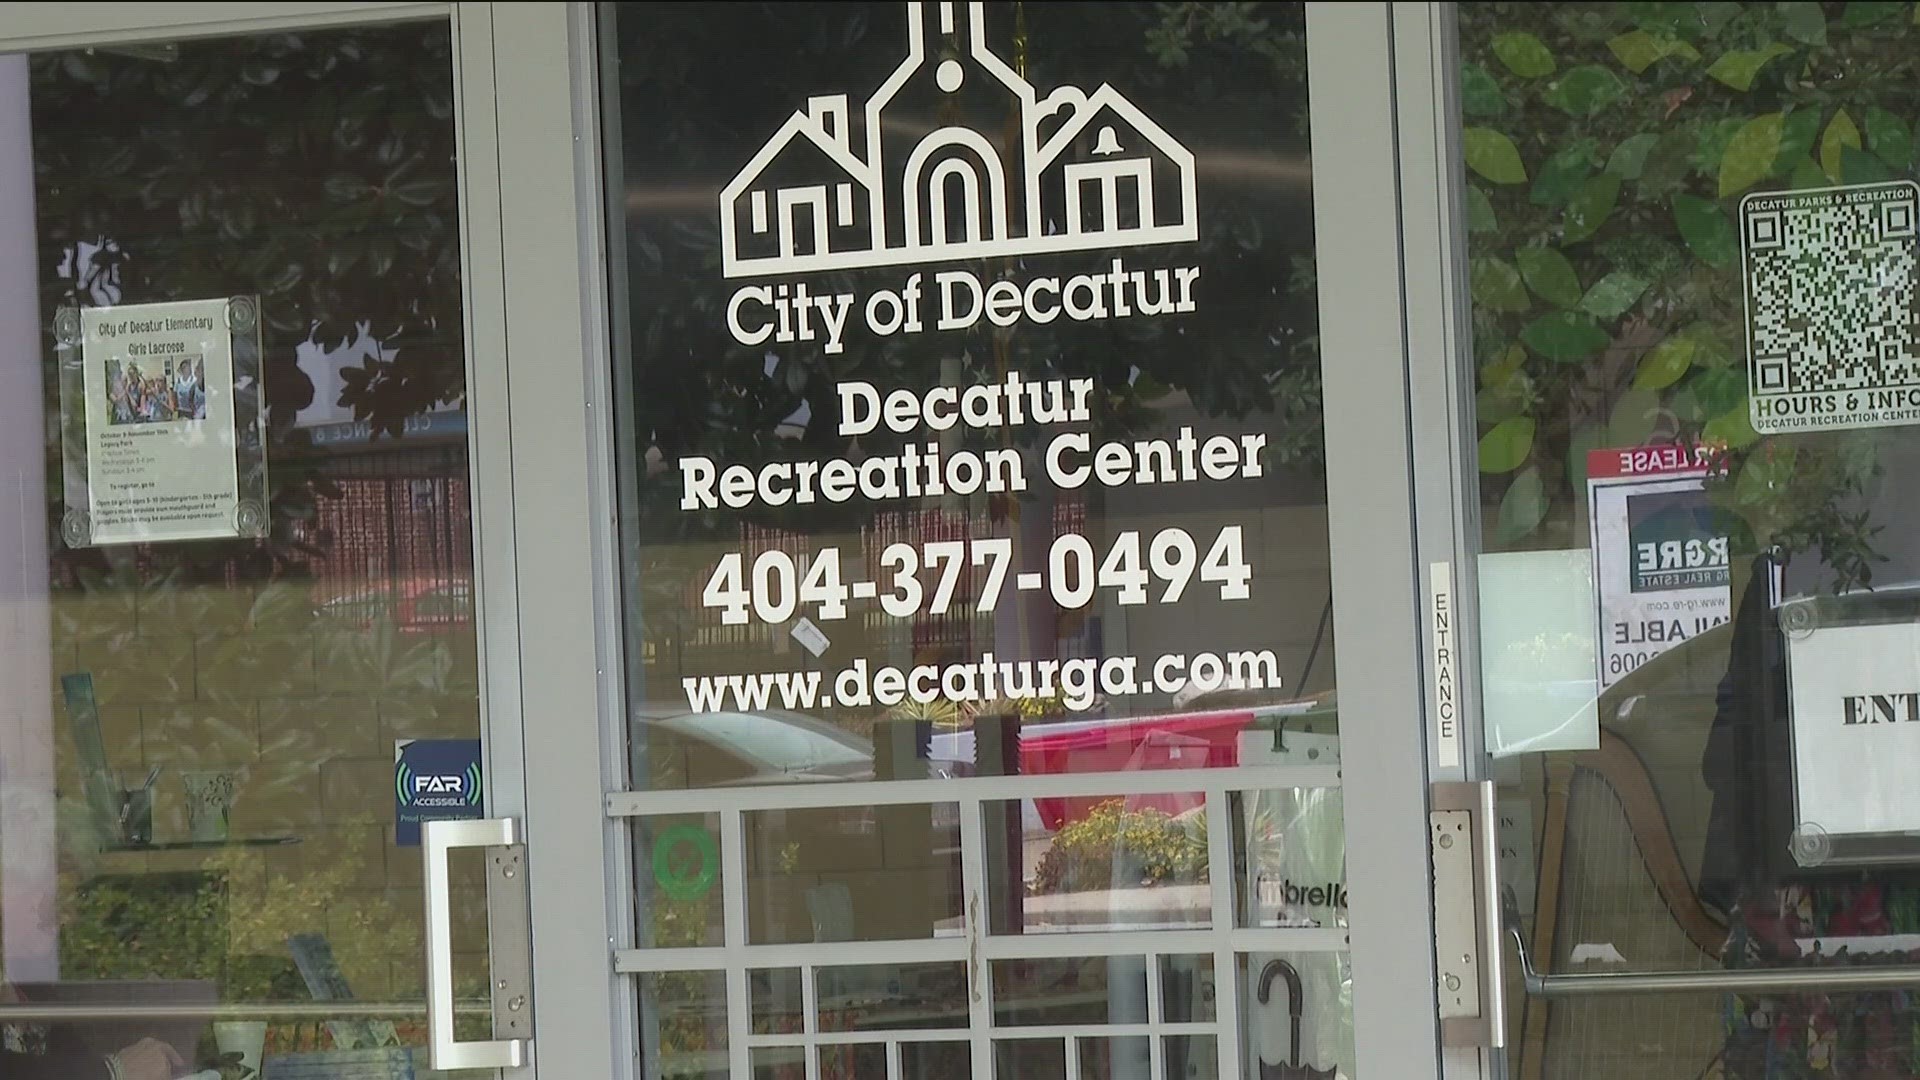 A dance group has been renting out rooms every week for decades at the rec center but may have to shop for another venue.